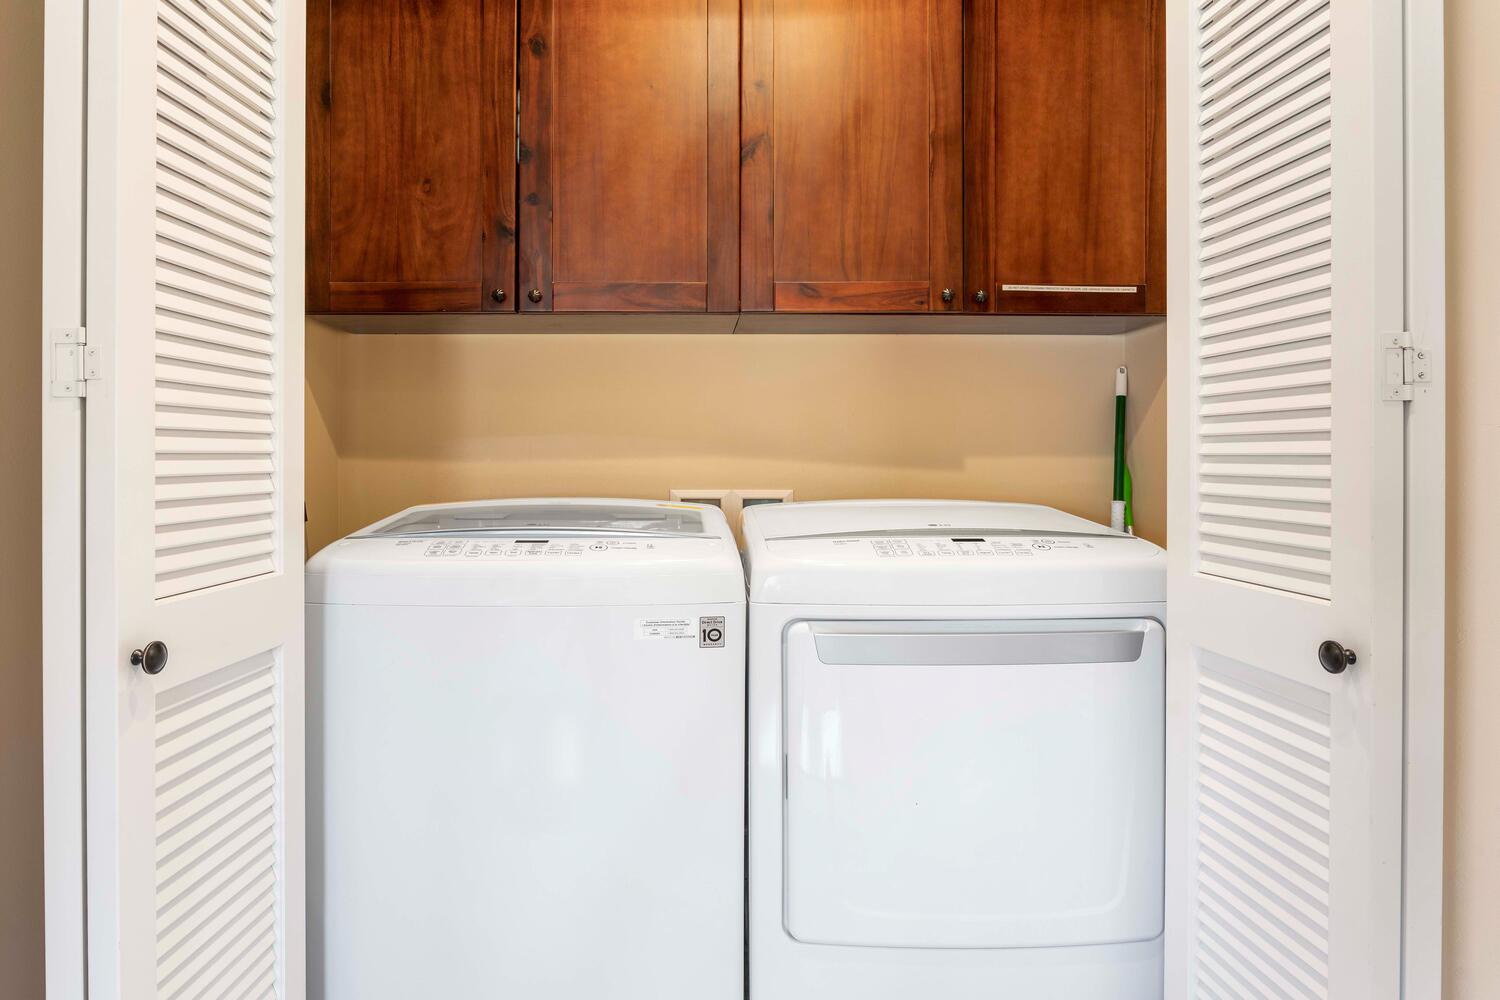 Kailua Kona Vacation Rentals, Holua Kai #32 - An in-unit washer and dryer for your convenience.